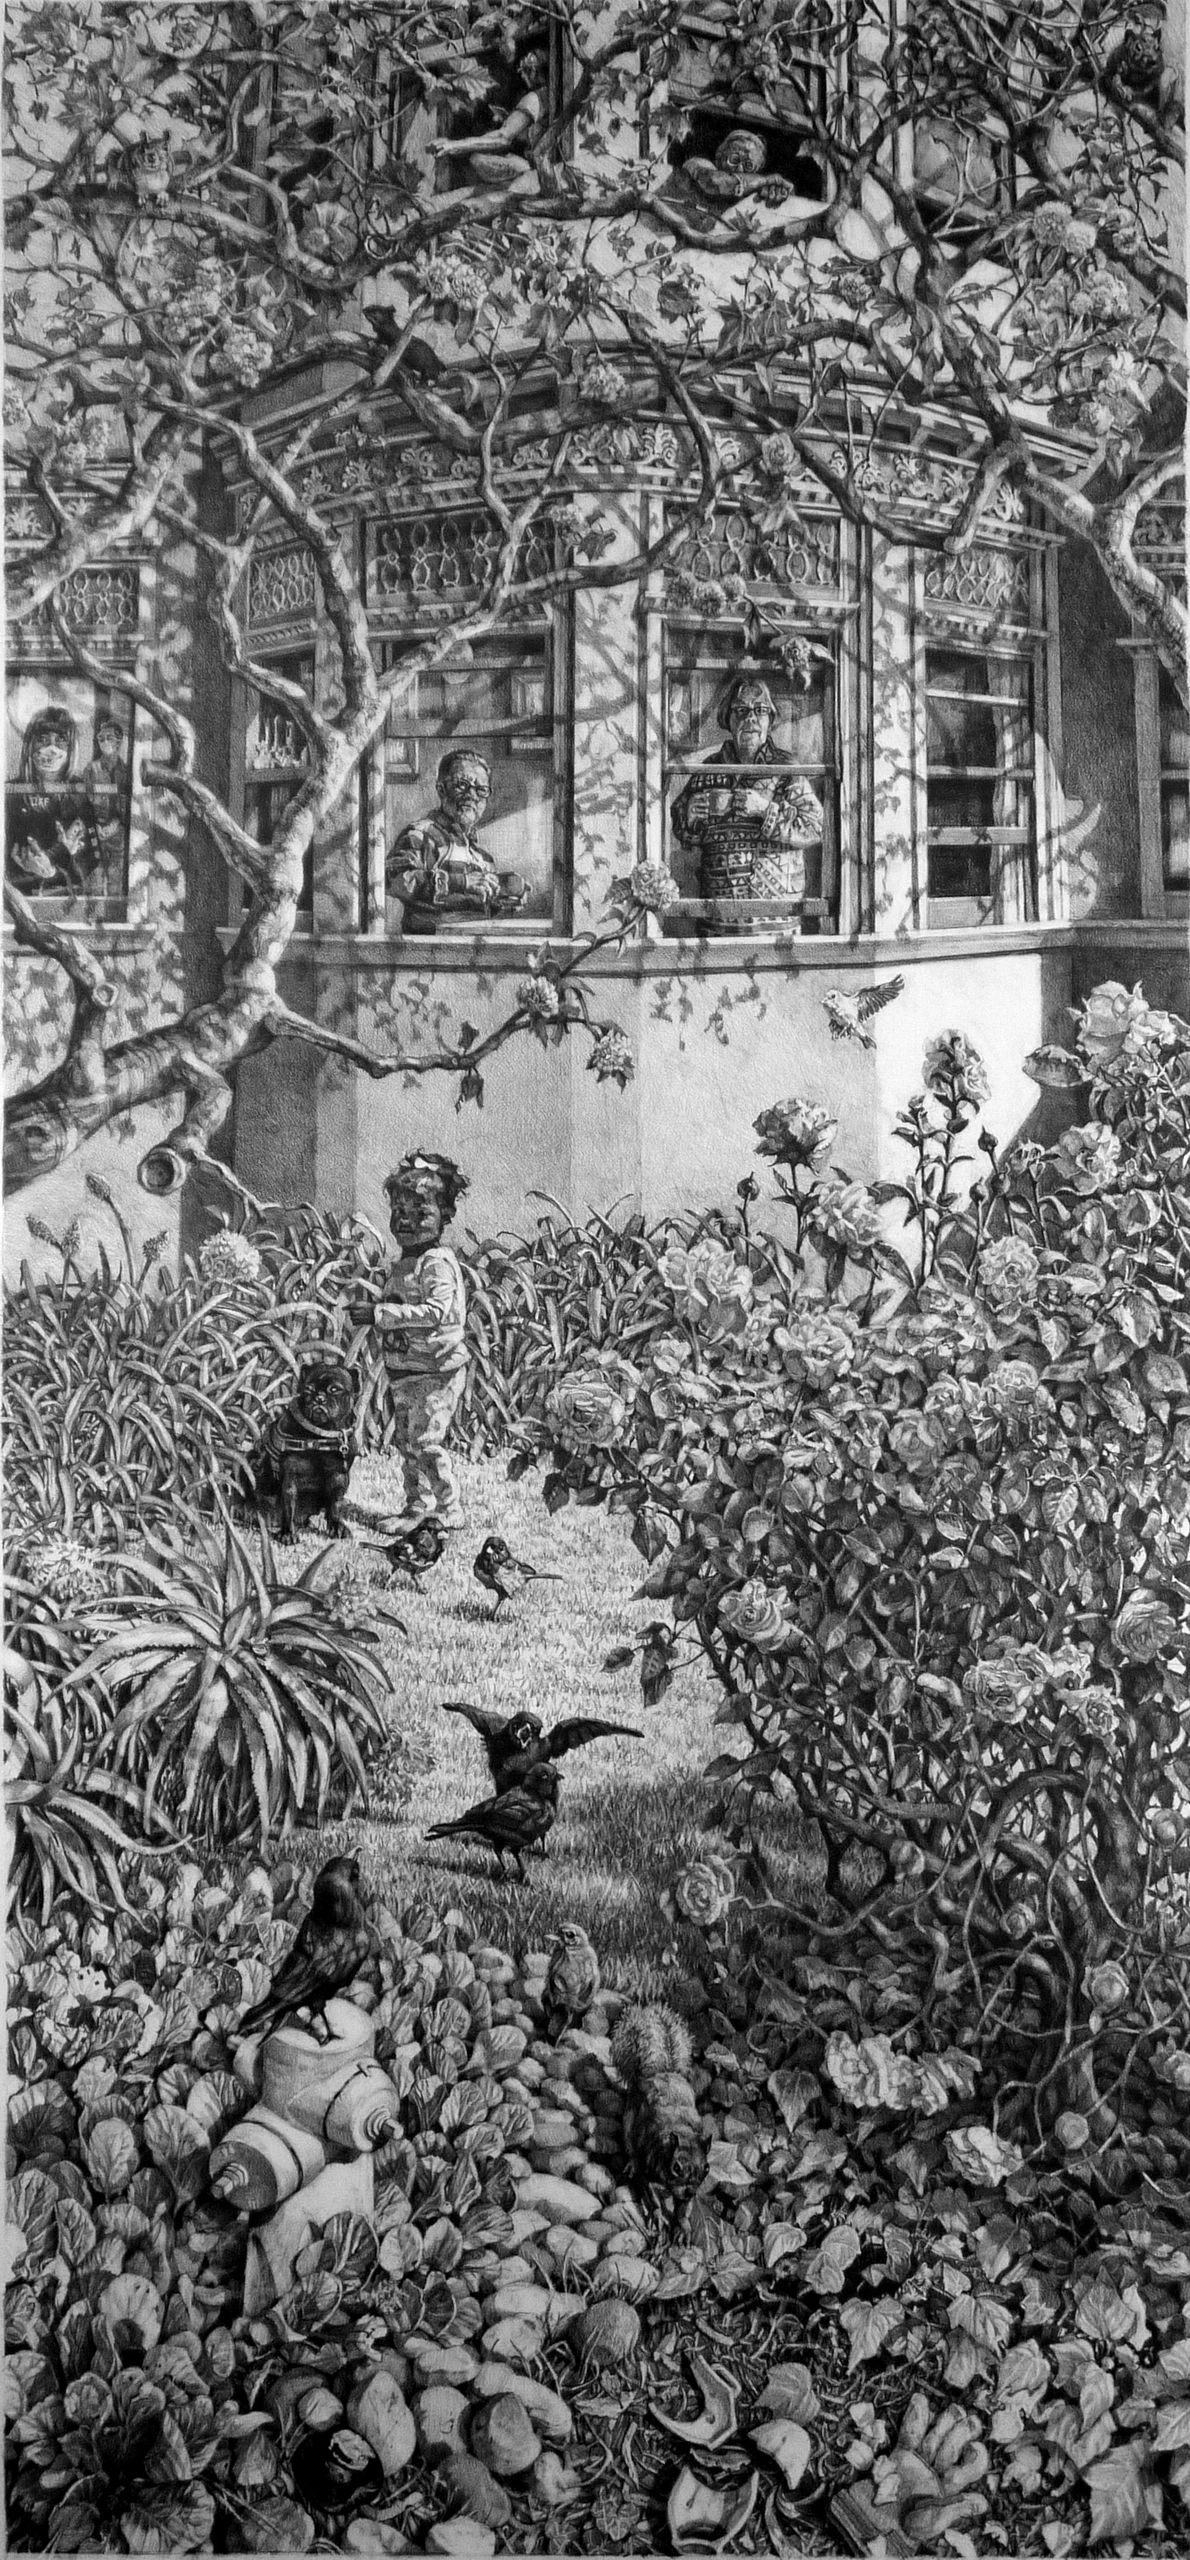 Vertical view of two-story house with people in windows, young black girl and small black dog in fro